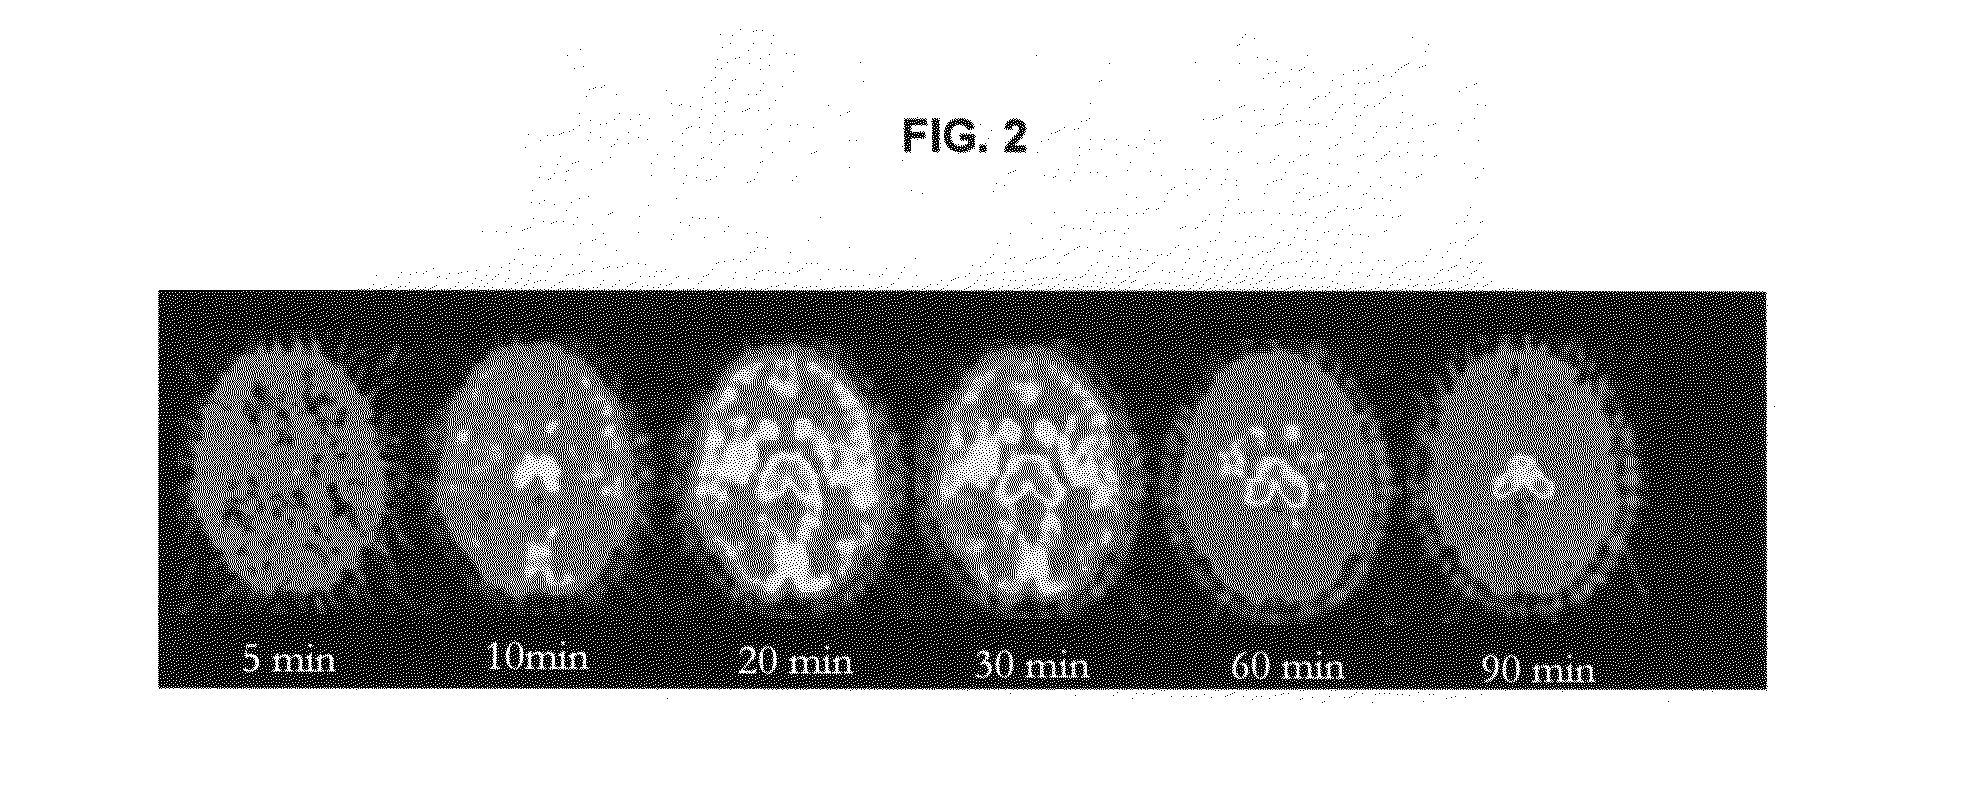 Methods for Diagnosing Diseases and Evaluating Treatments Therefor Using Pet